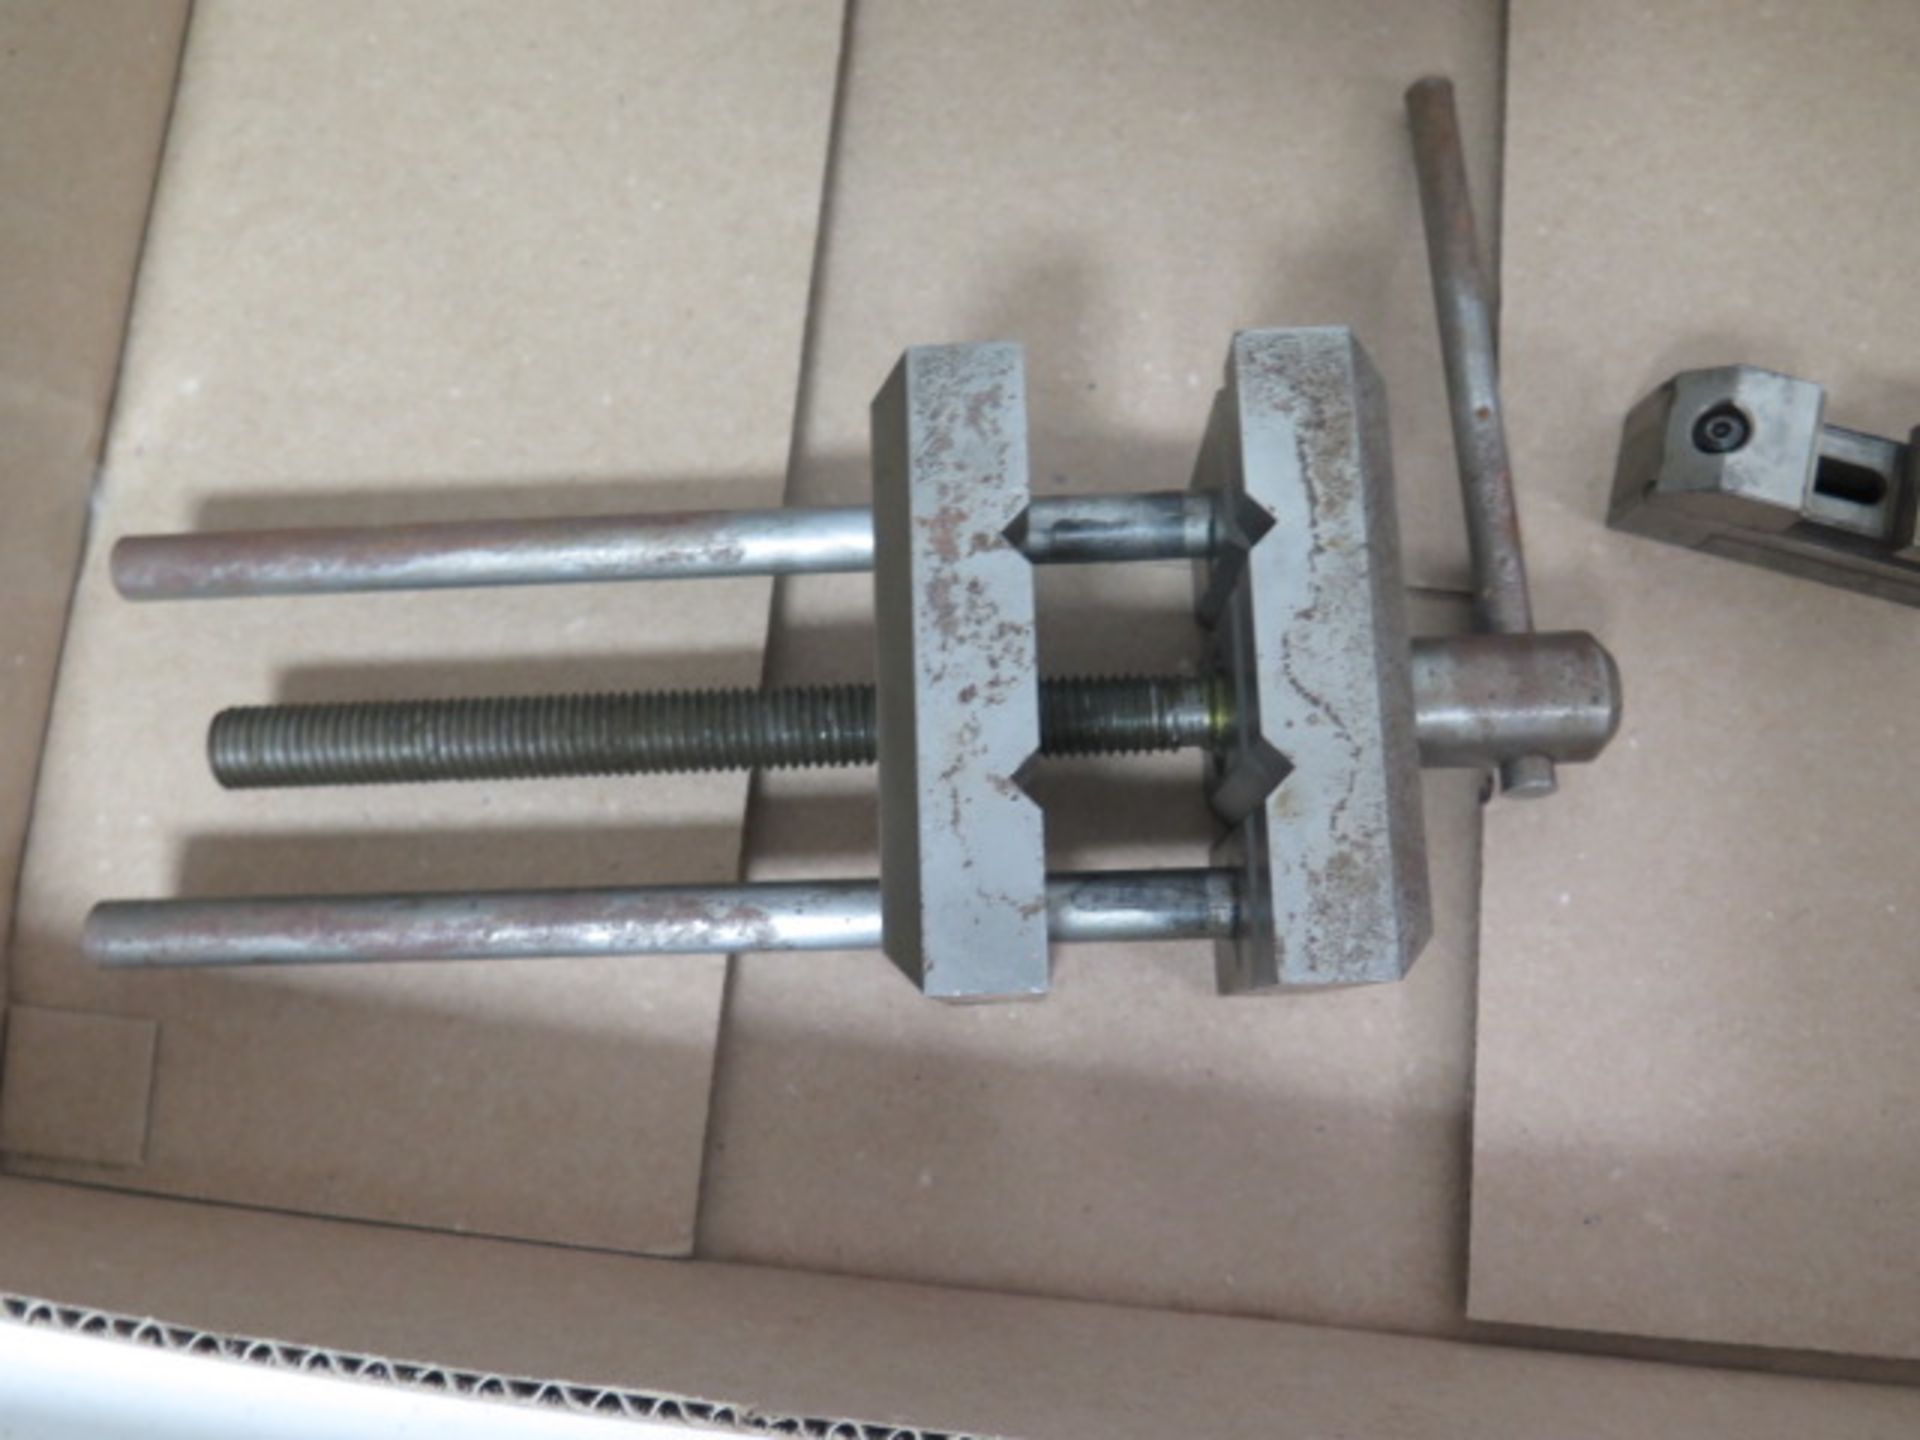 1" Precision Machinists Vise and 4" Machine Vise (SOLD AS-IS - NO WARRANTY) - Image 2 of 5